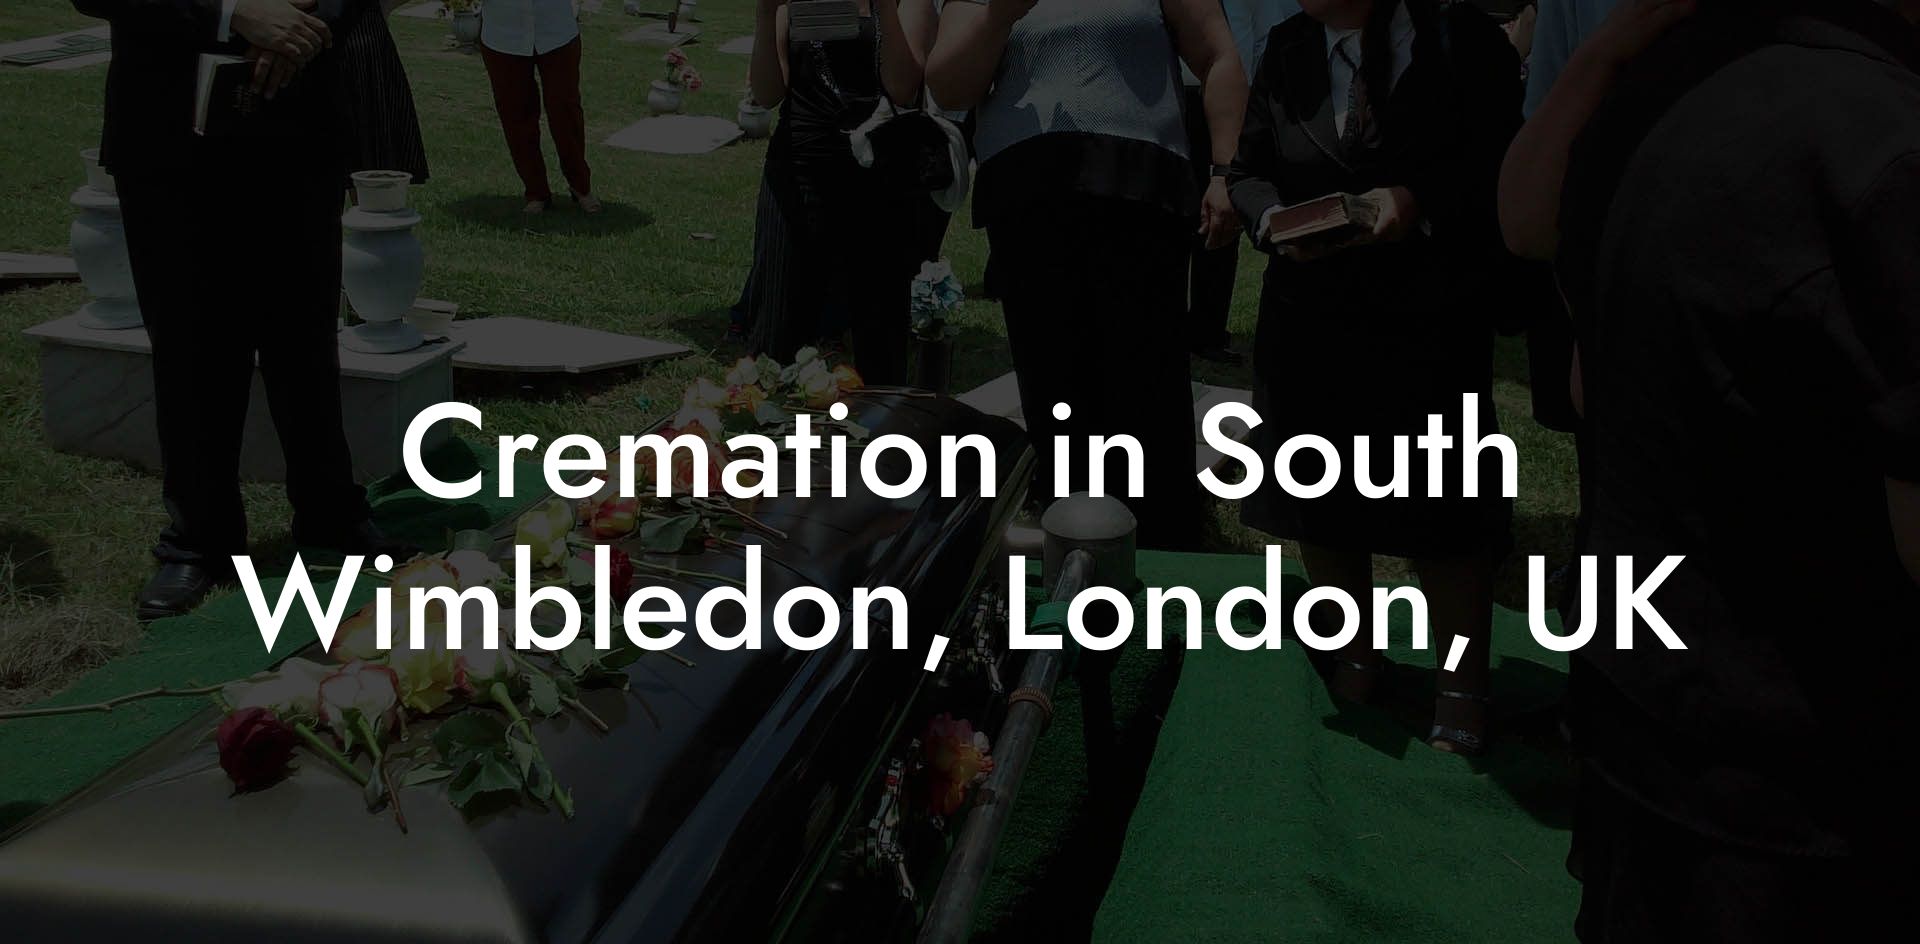 Cremation in South Wimbledon, London, UK